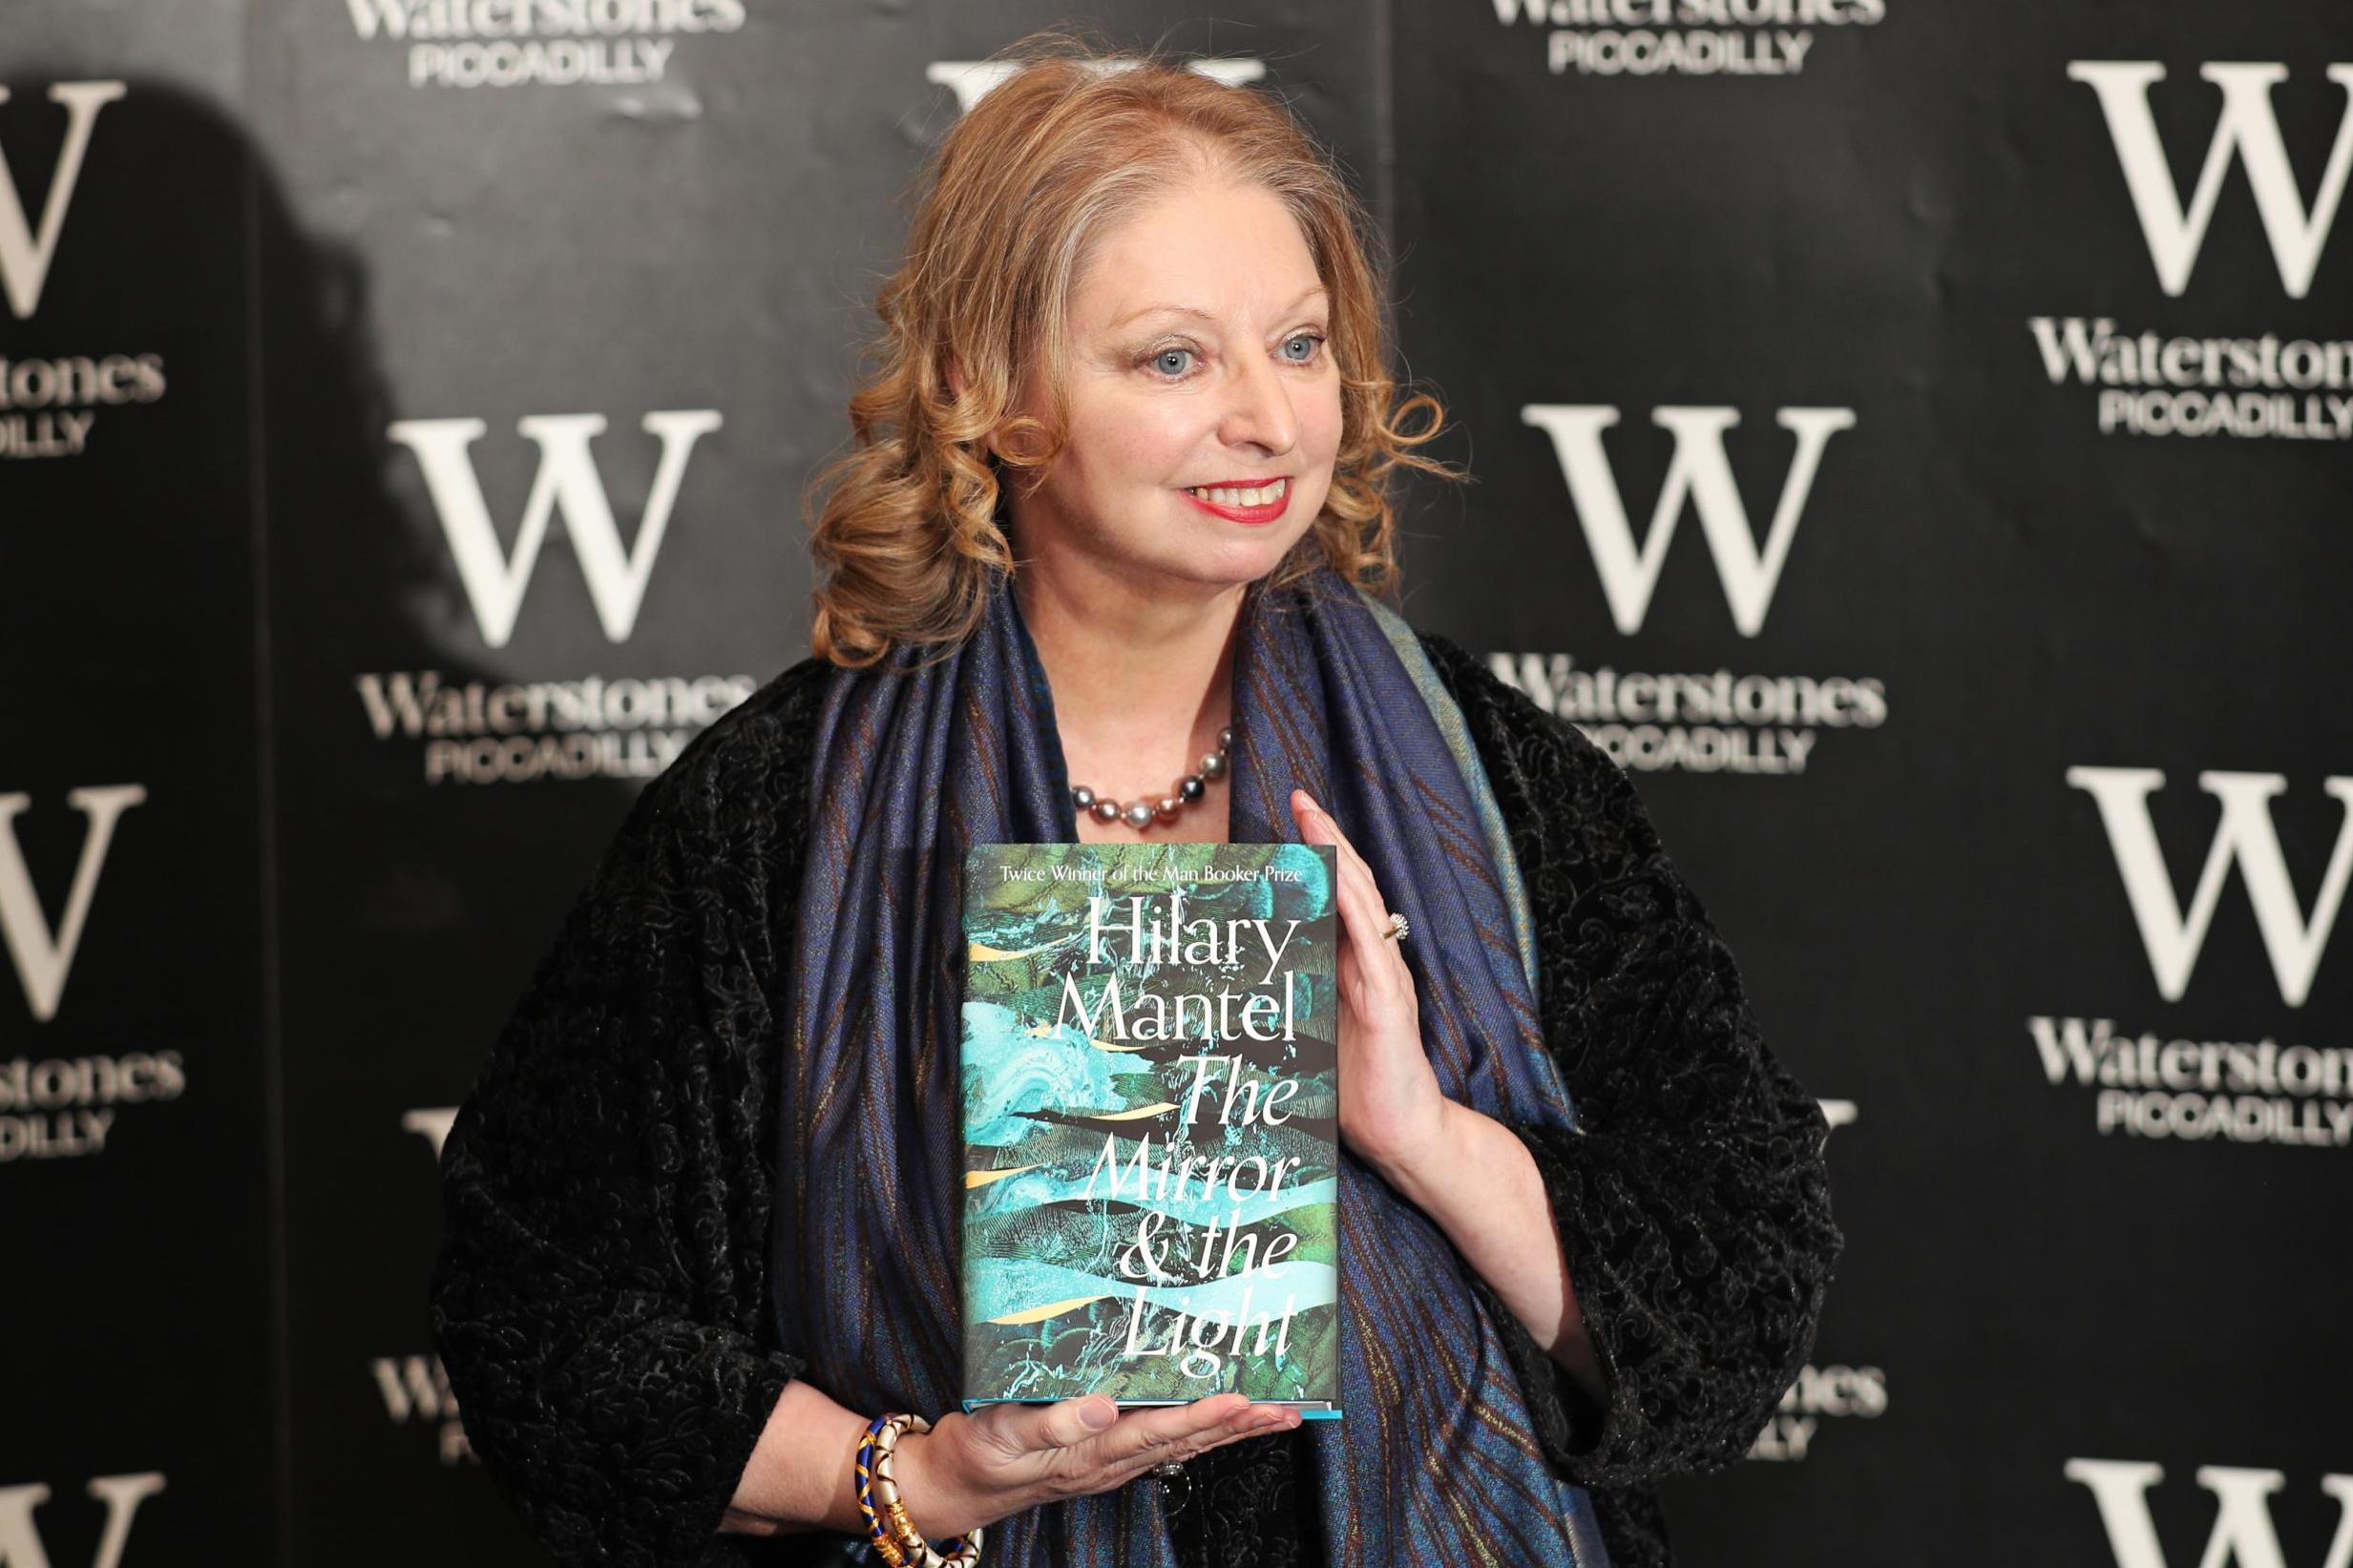 Hilary Mantel has earned a spot on the list with her book ‘The Mirror & The Light’